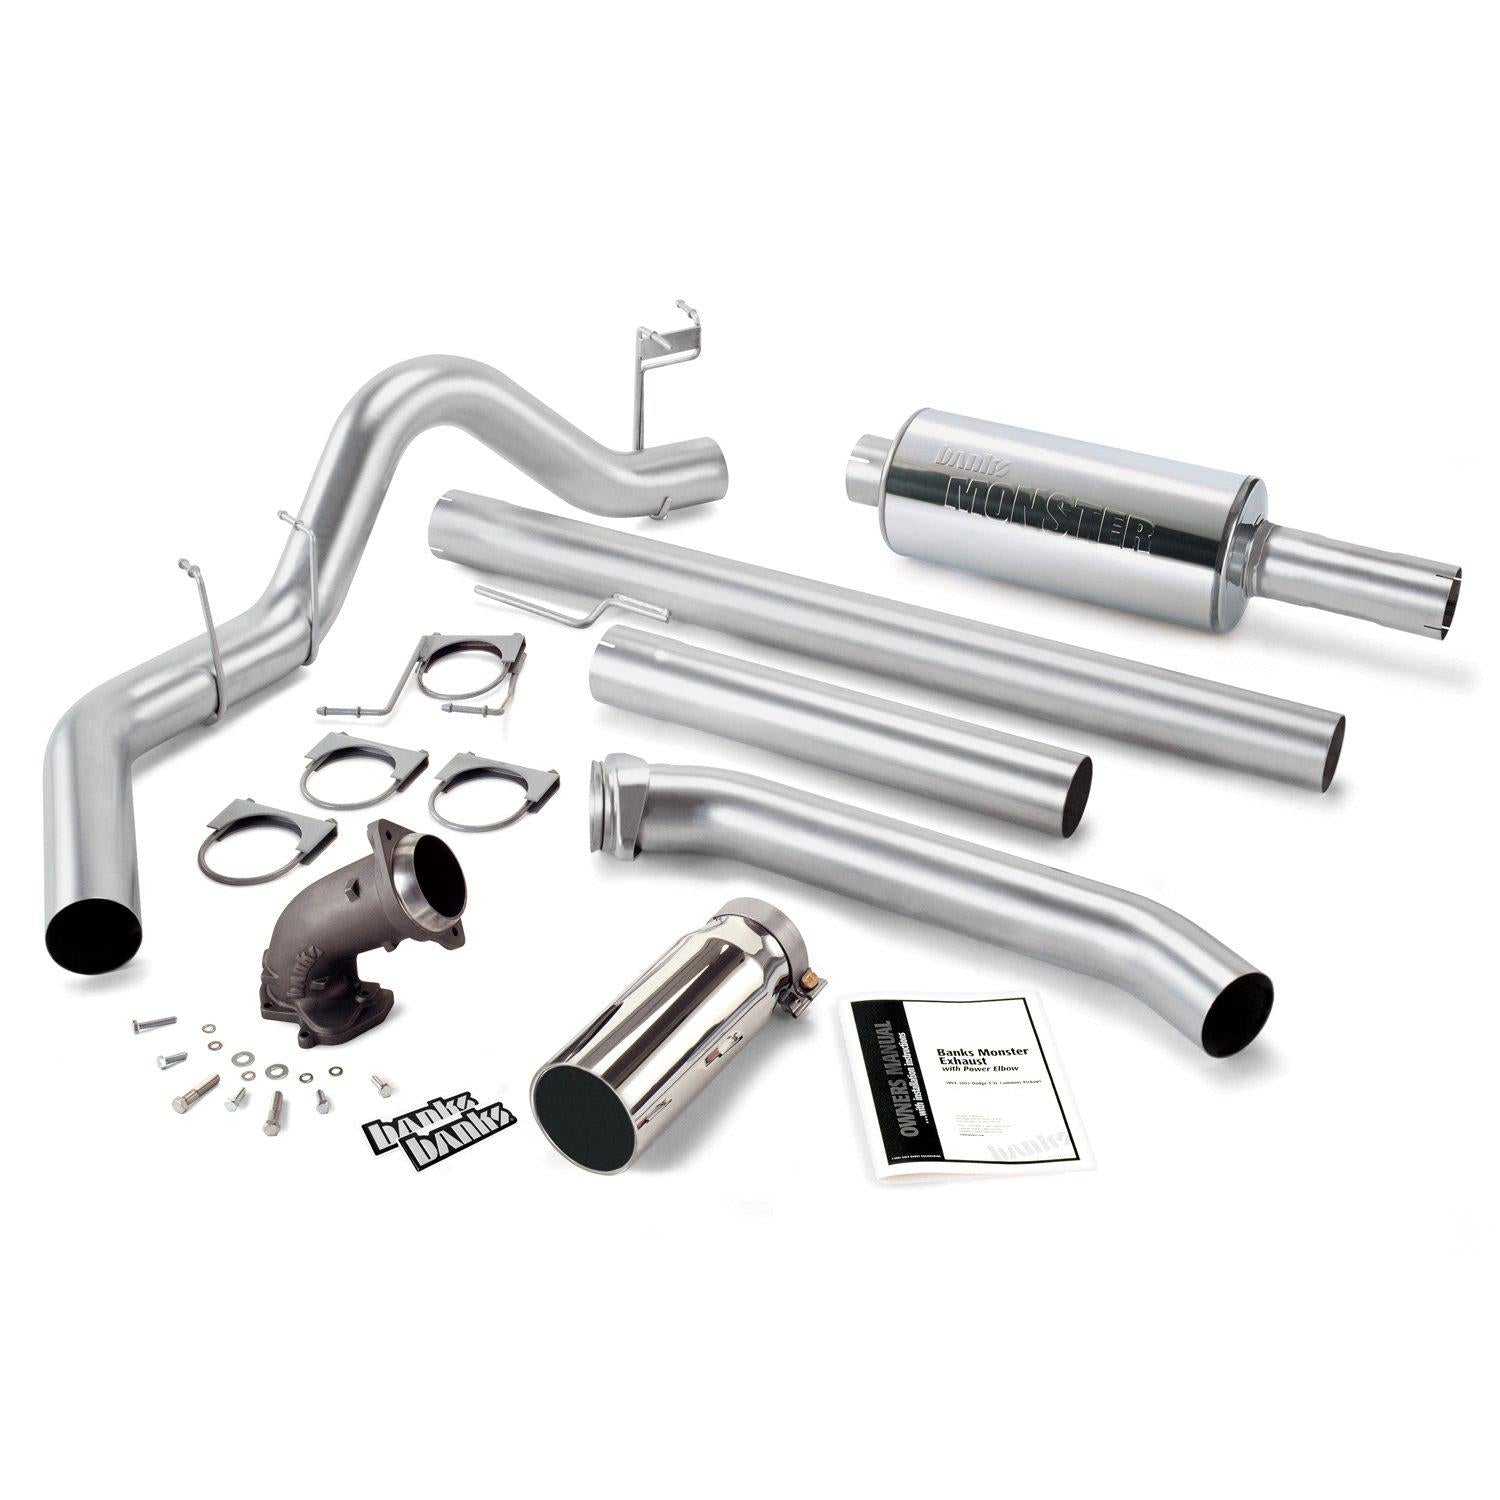 1998-2002 Cummins Exhaust System Kit - Extended Bed (48638)-Exhaust System Kit-Banks Power-48638-Dirty Diesel Customs